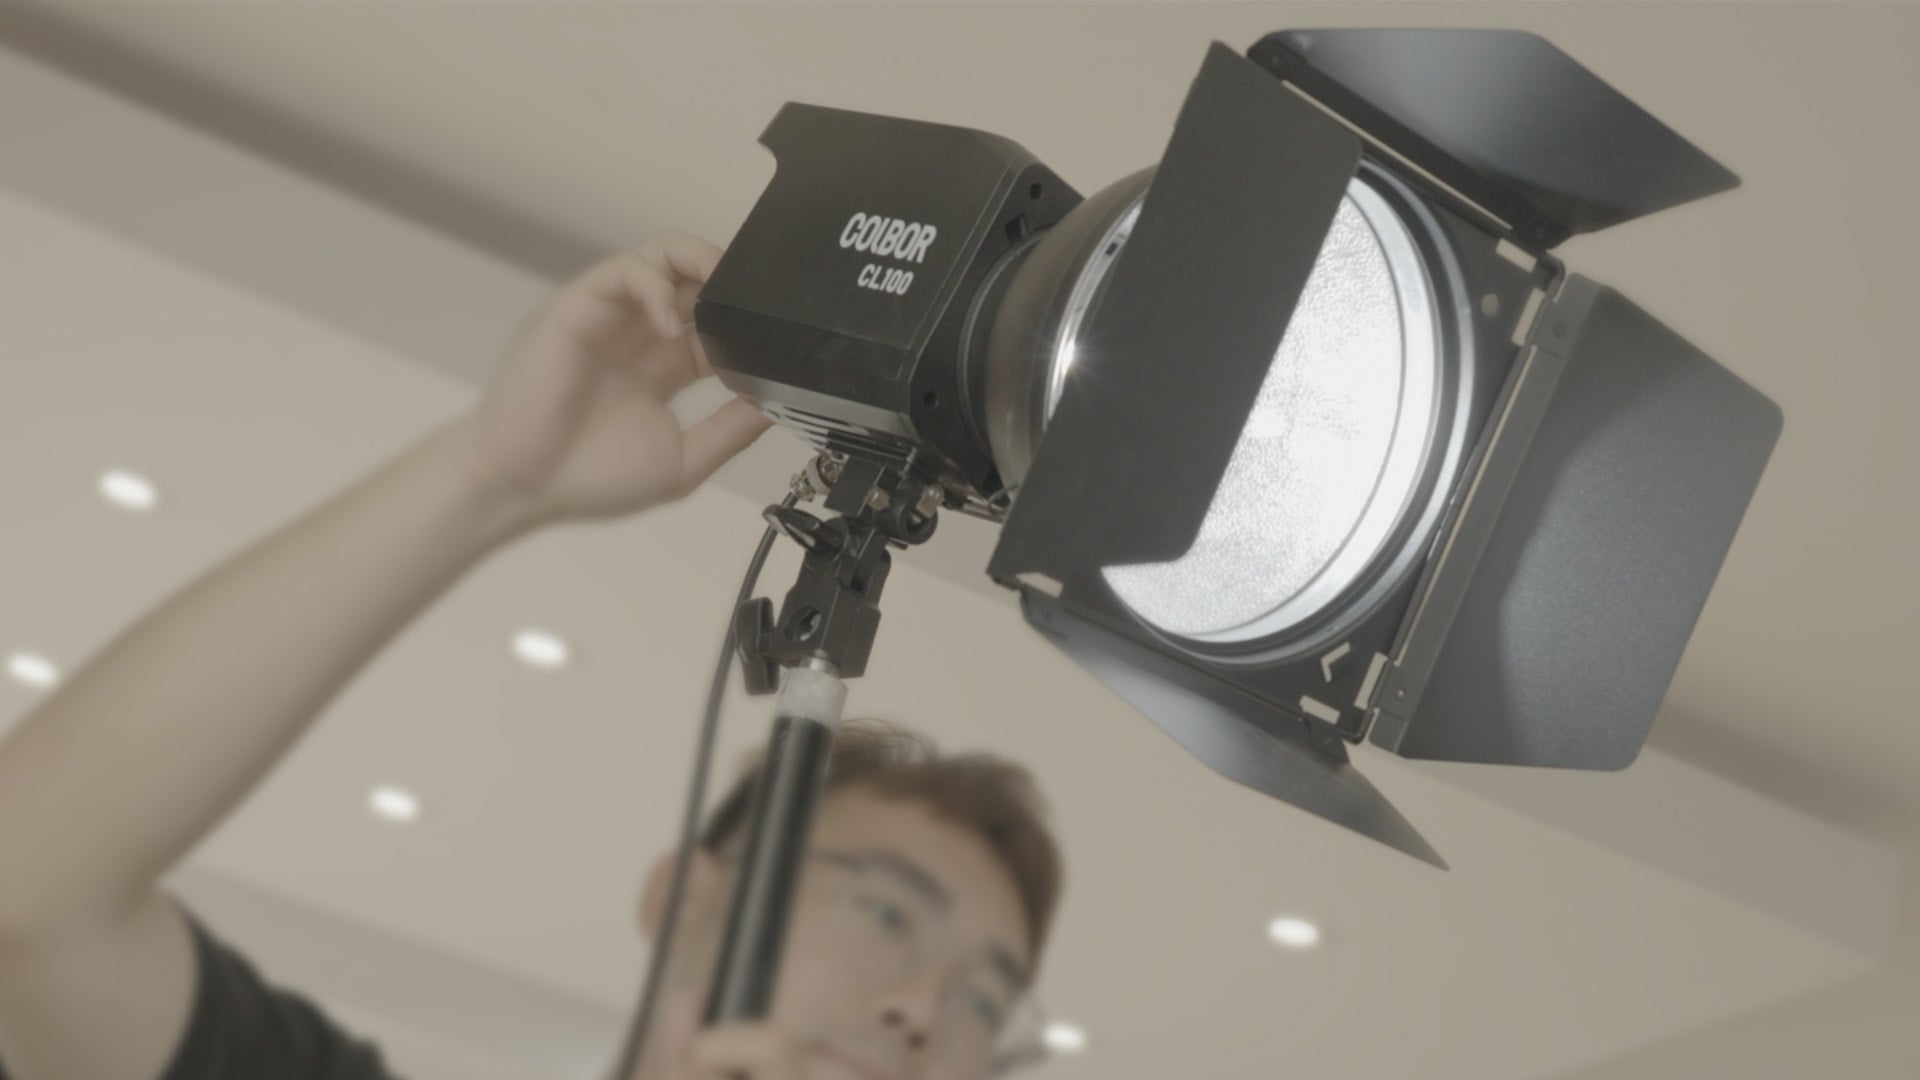 COLBOR CL100 offers LED lighting for video interview.